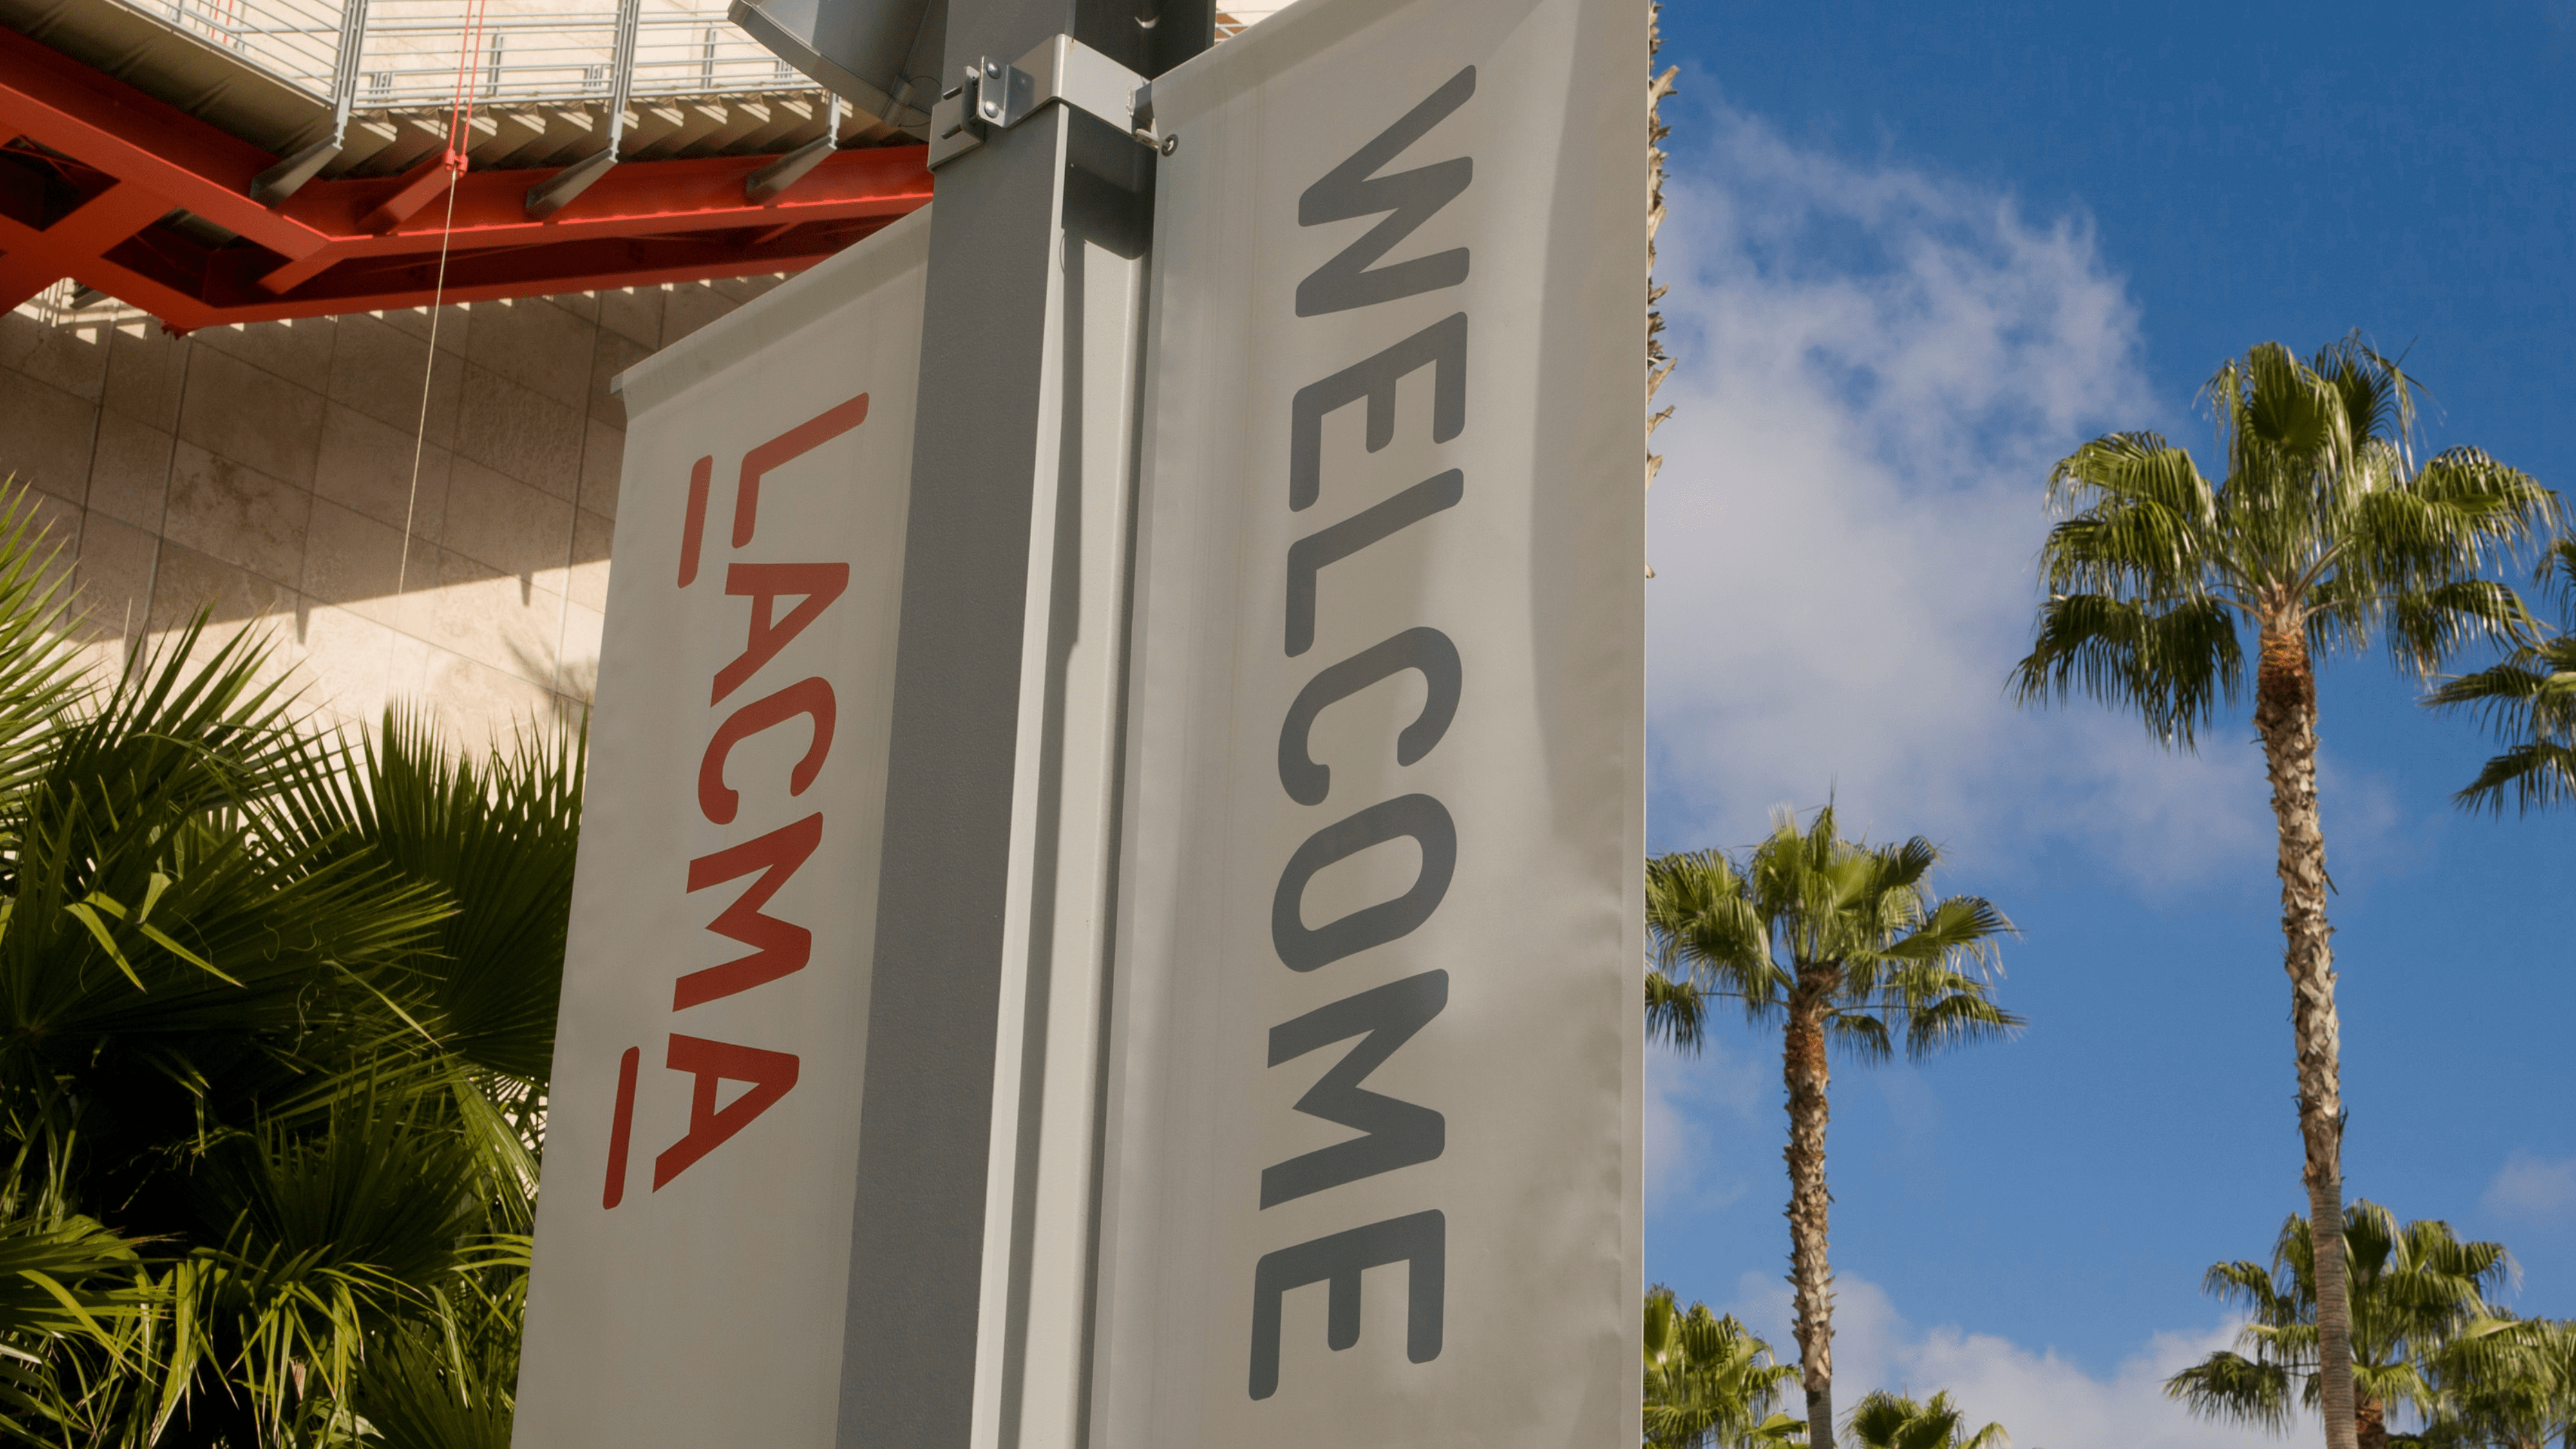 A welcome sign displayed at the Los Angeles County Museum of Art (LACMA) is viewed on April 15, 2012 in Los Angeles, California.